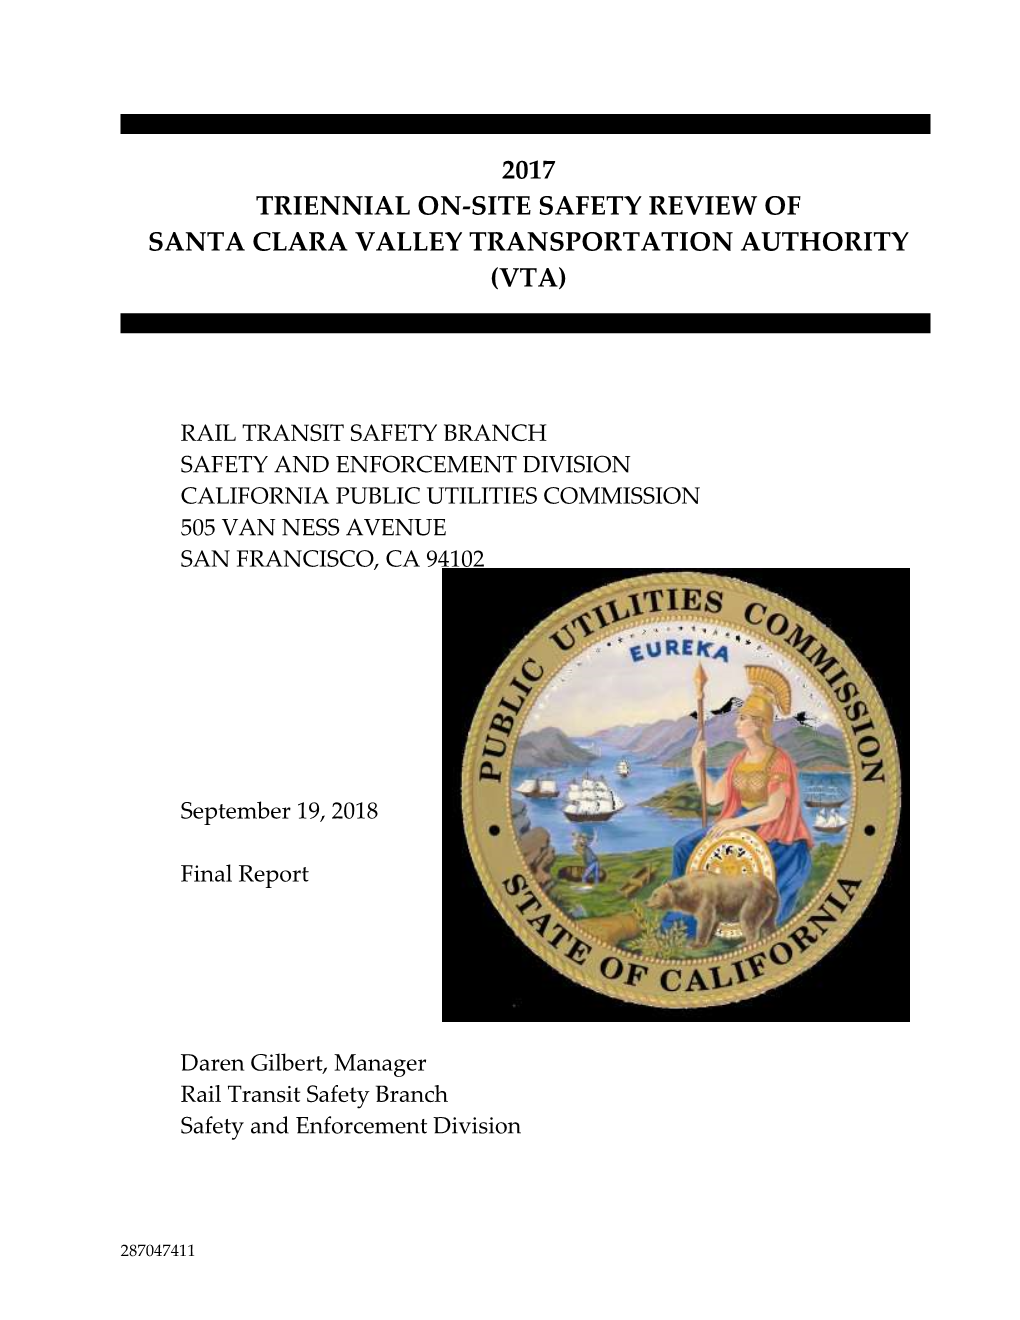 2017 Triennial On-Site Safety Review of Santa Clara Valley Transportation Authority (Vta)